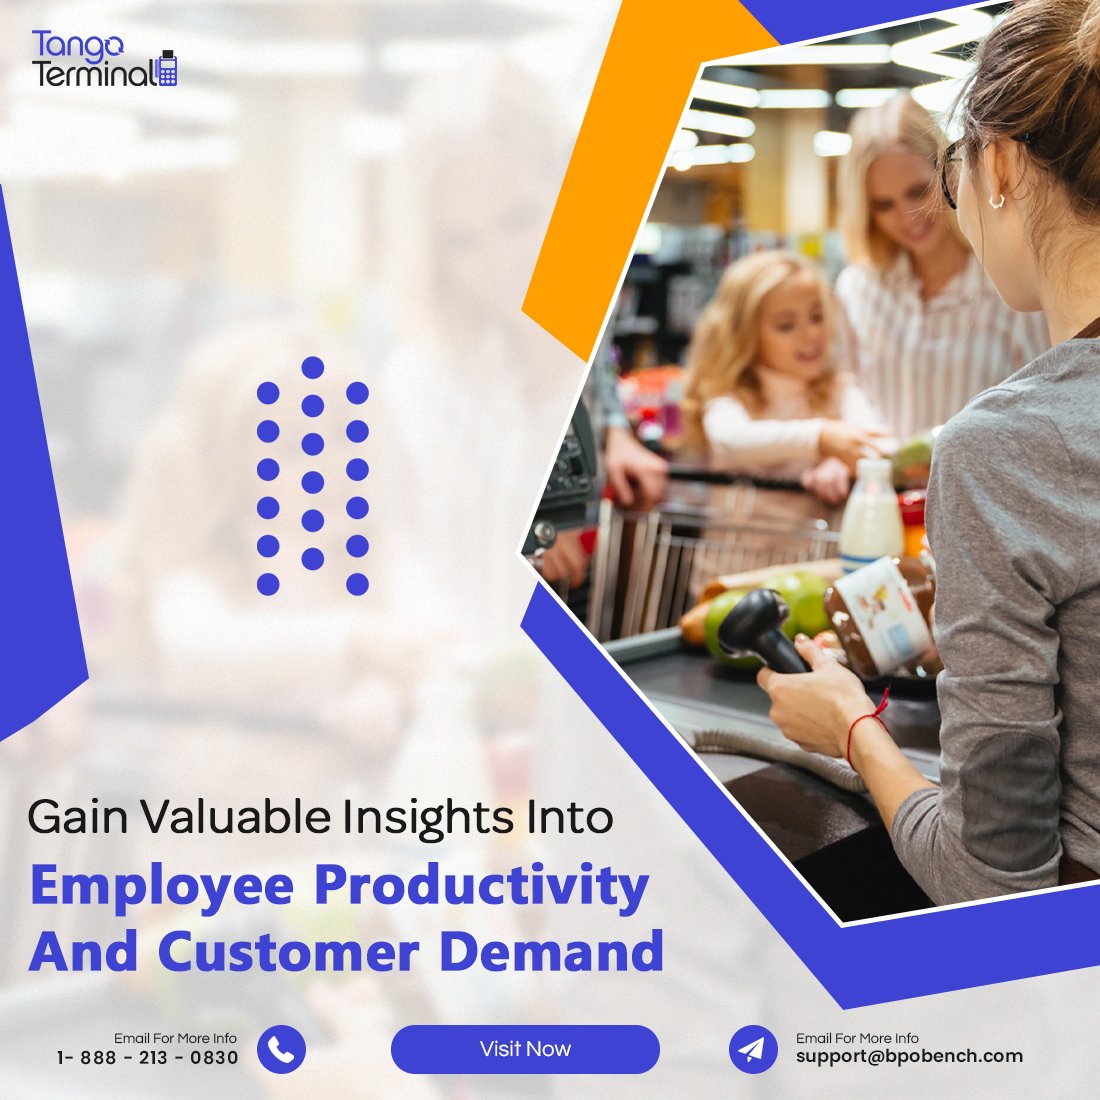 The data captured by a POS system provides valuable insights into employee productivity and customer demand.

#tangoterminal #pos #retailbusiness #automatingtasks #marketingsolution #ecommerce